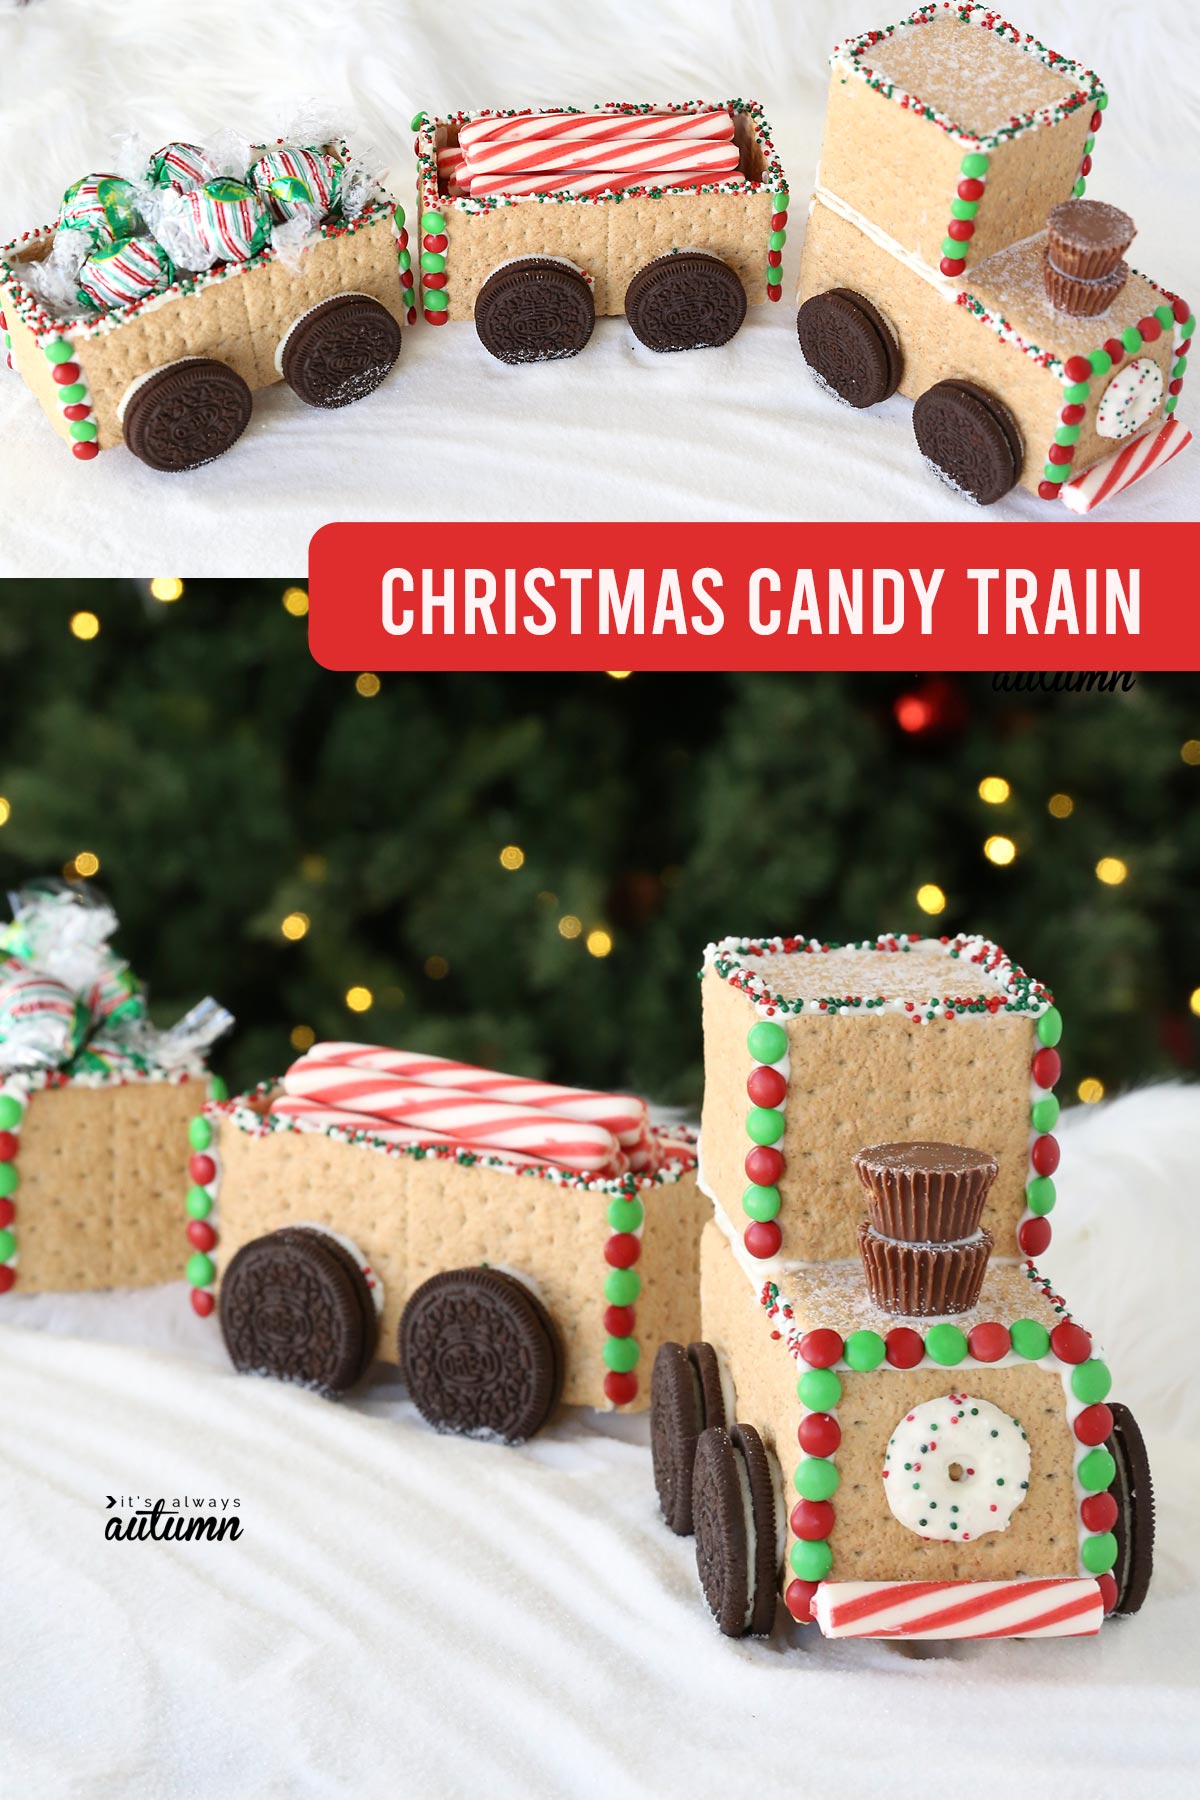 Christmas train made from graham crackers